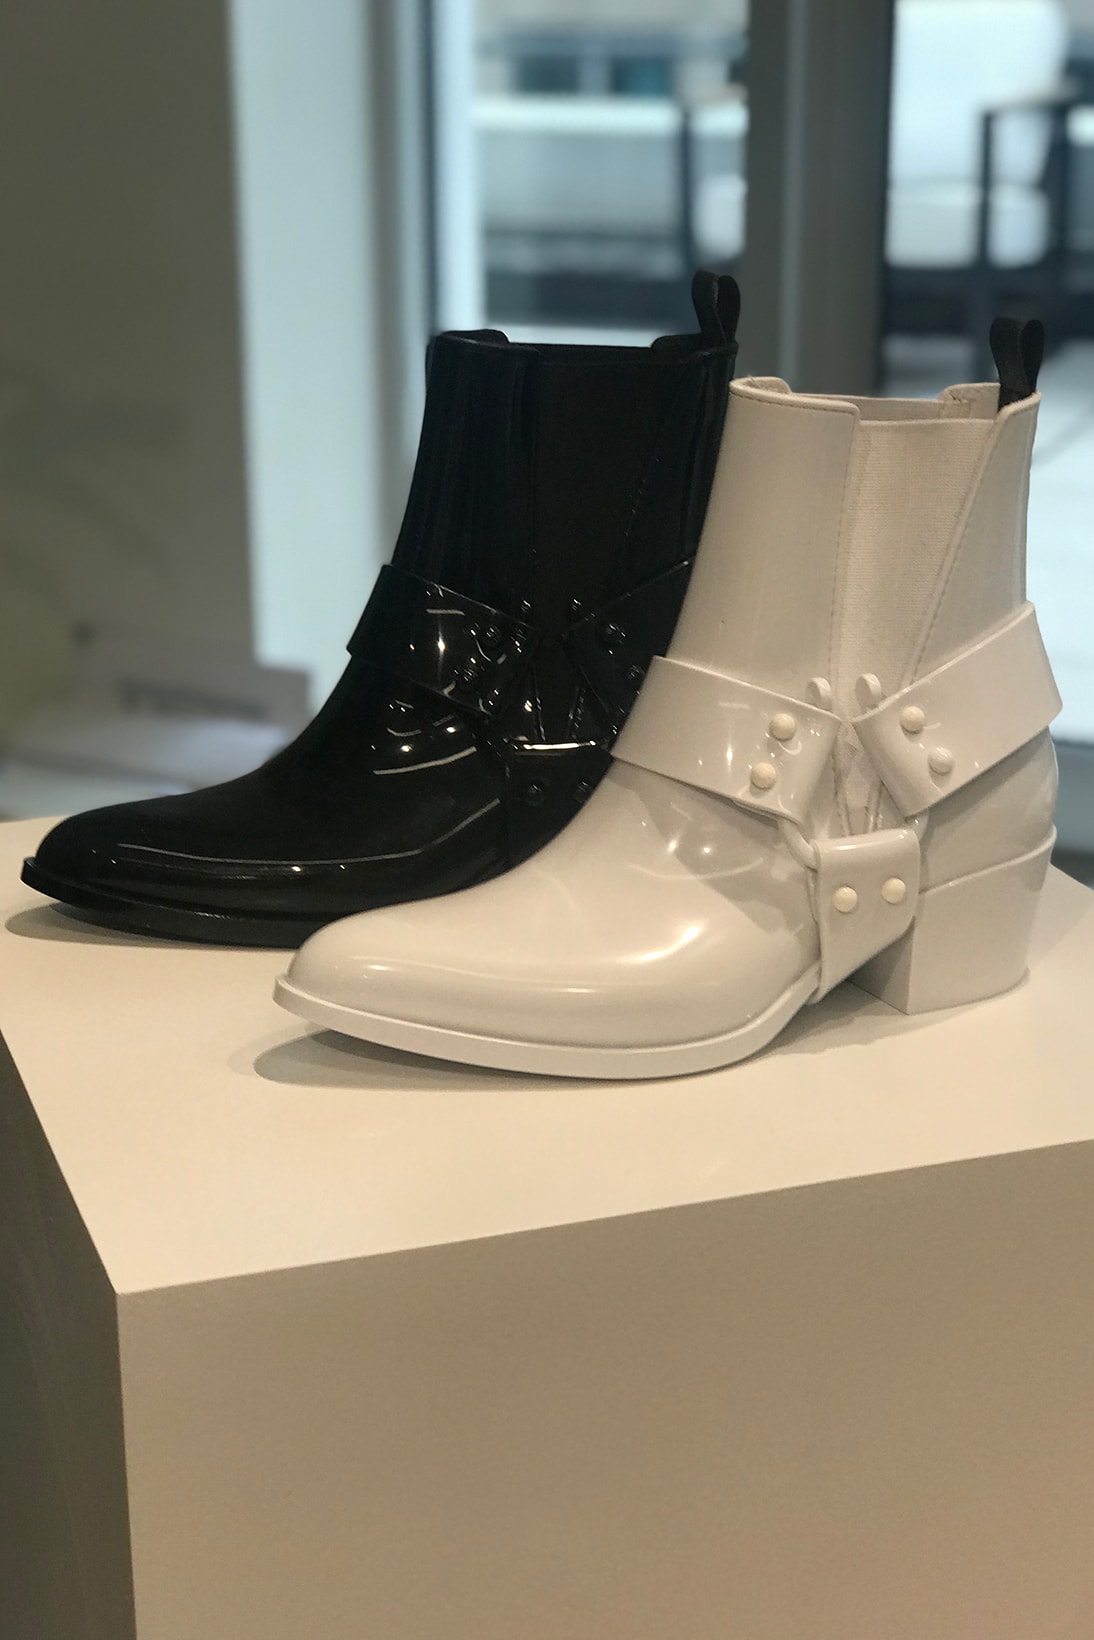 Sneak Peeks: Kanye West's Shoe Collection for Louis Vuitton